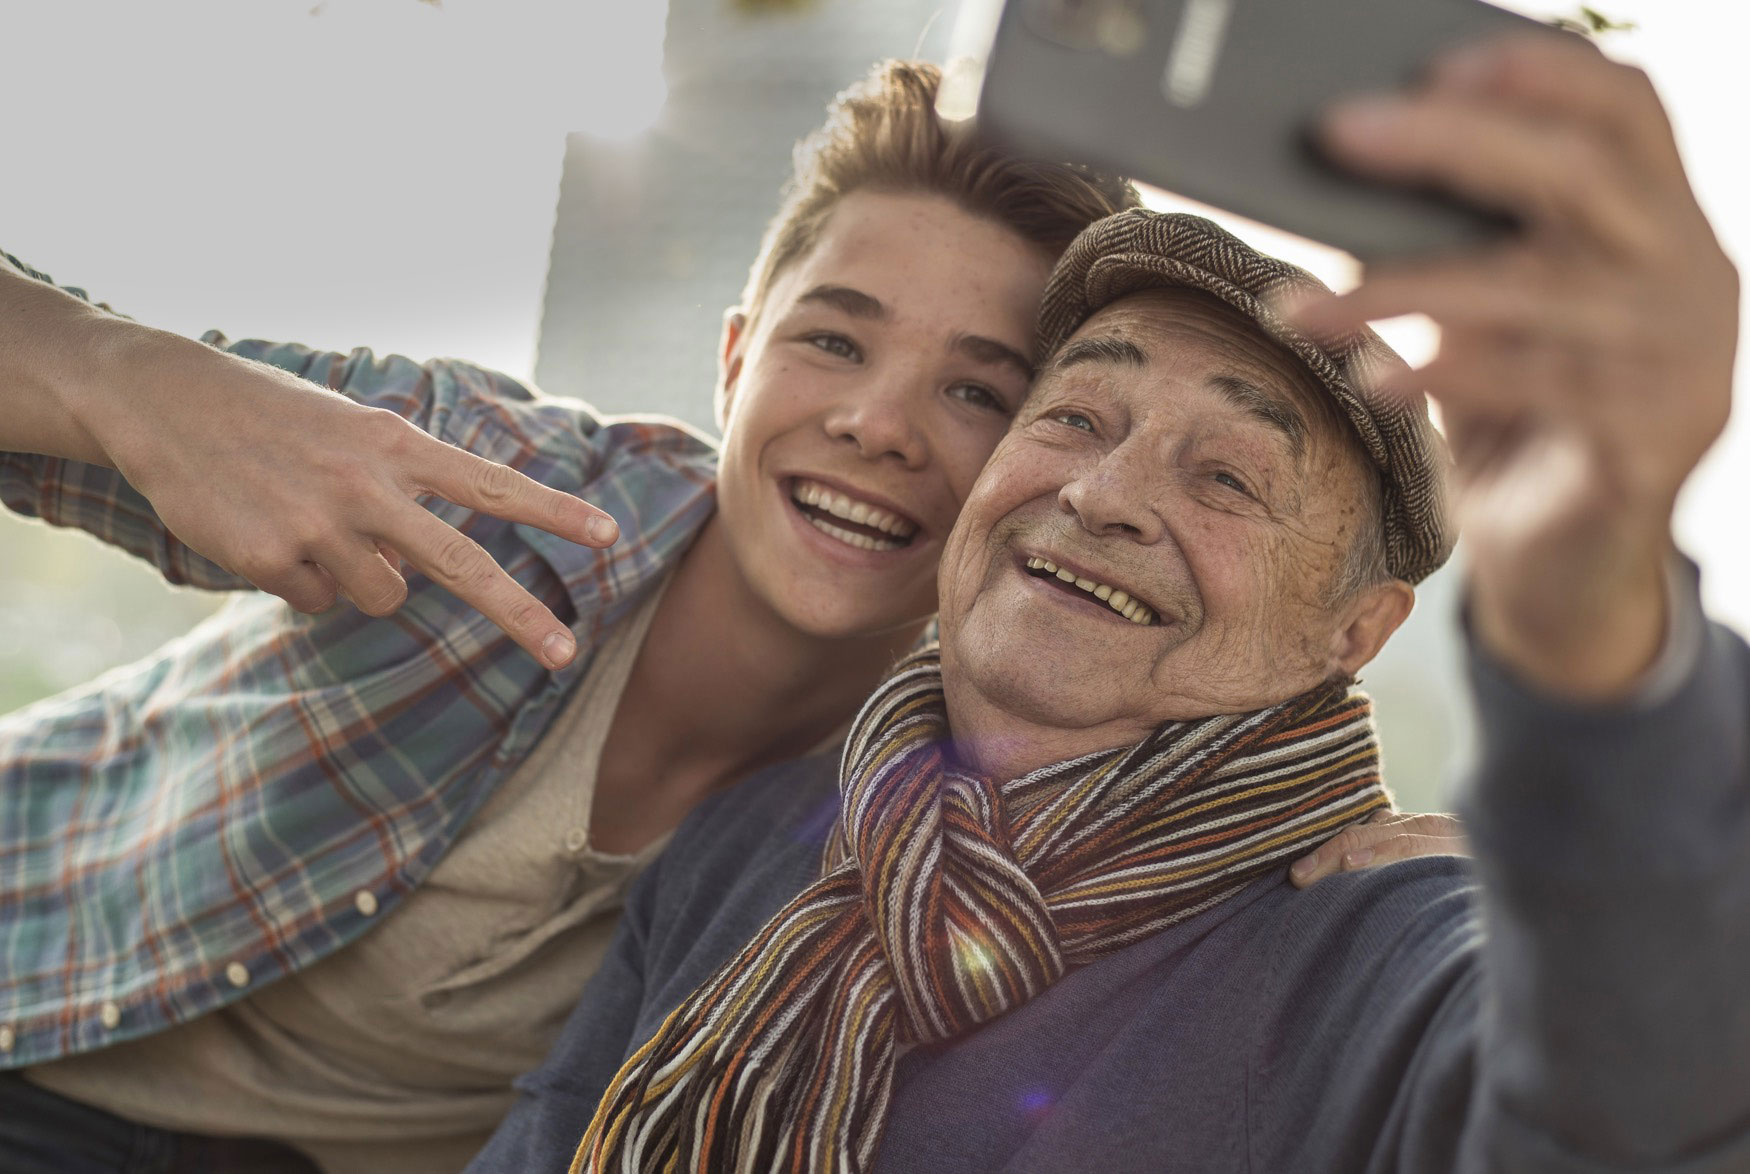 Older man and youth taking selfie photo